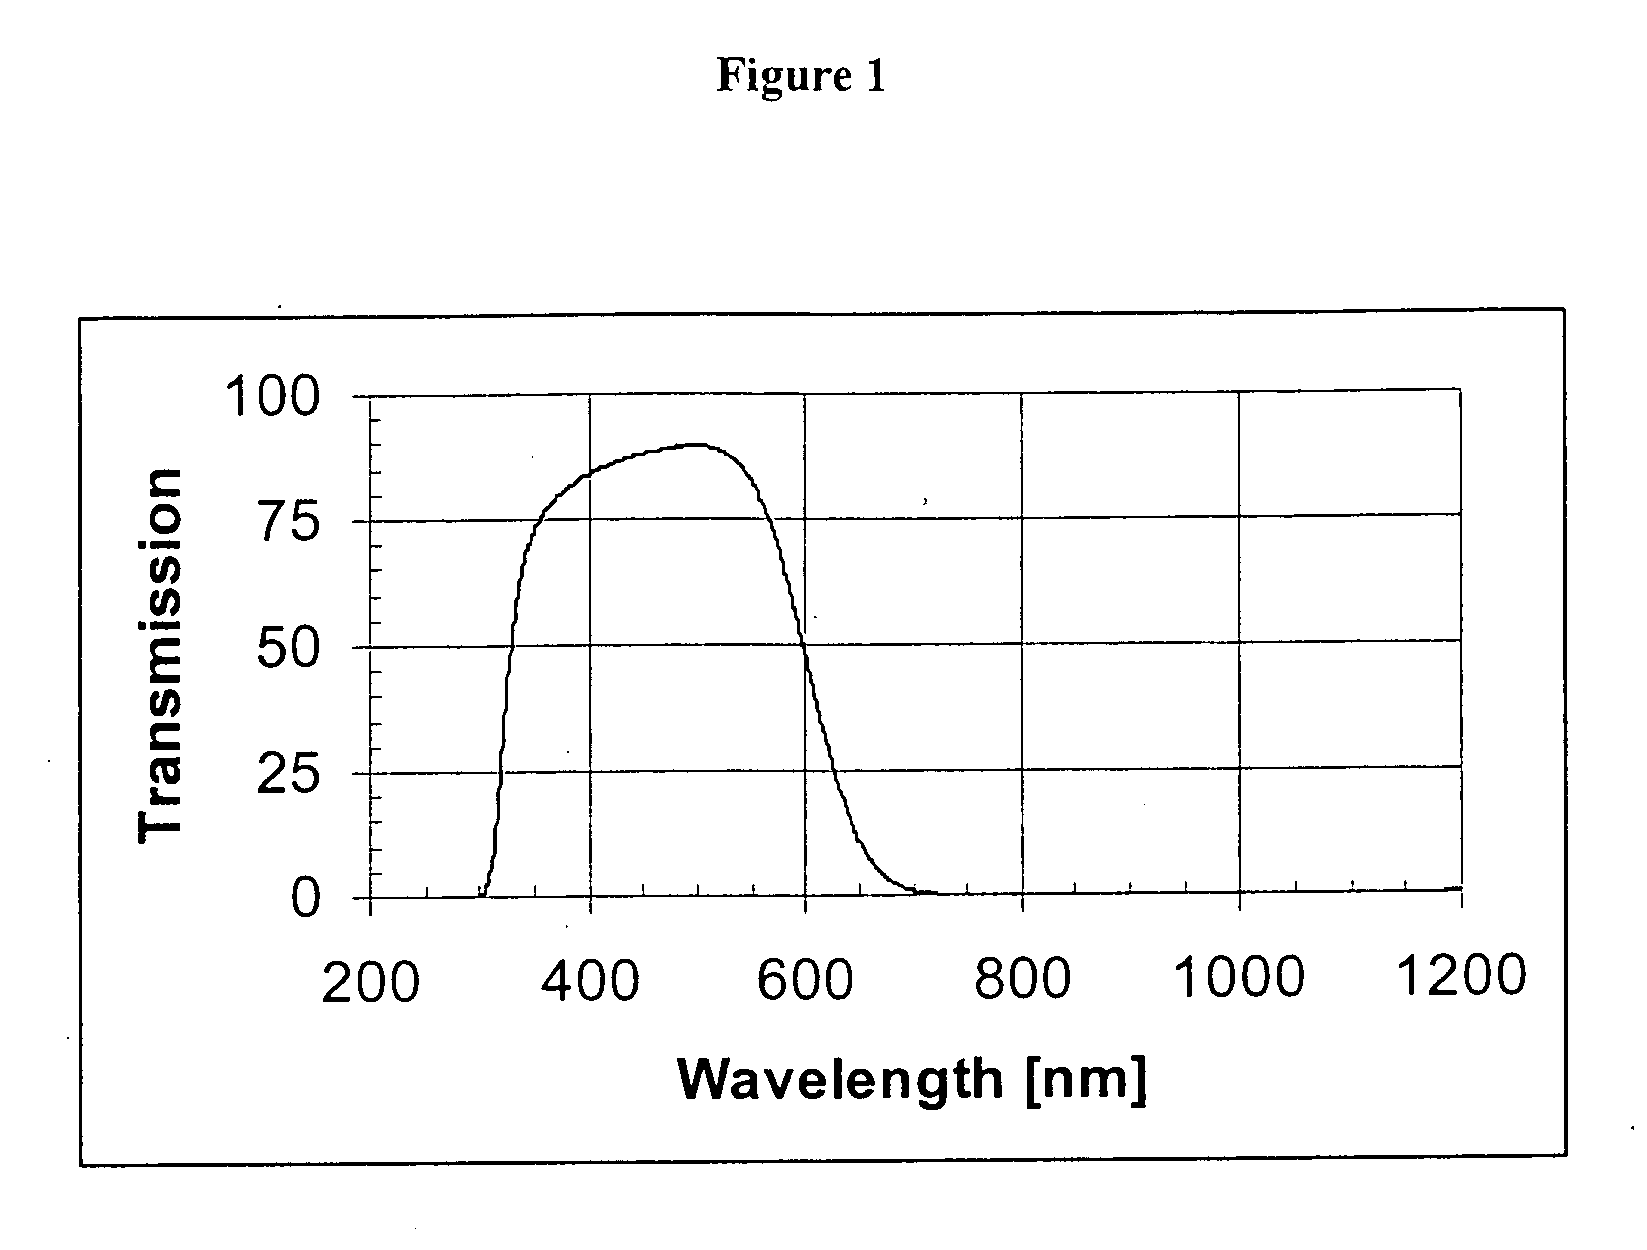 Aluminophosphate glass containing copper (II) oxide and uses thereof for light filtering